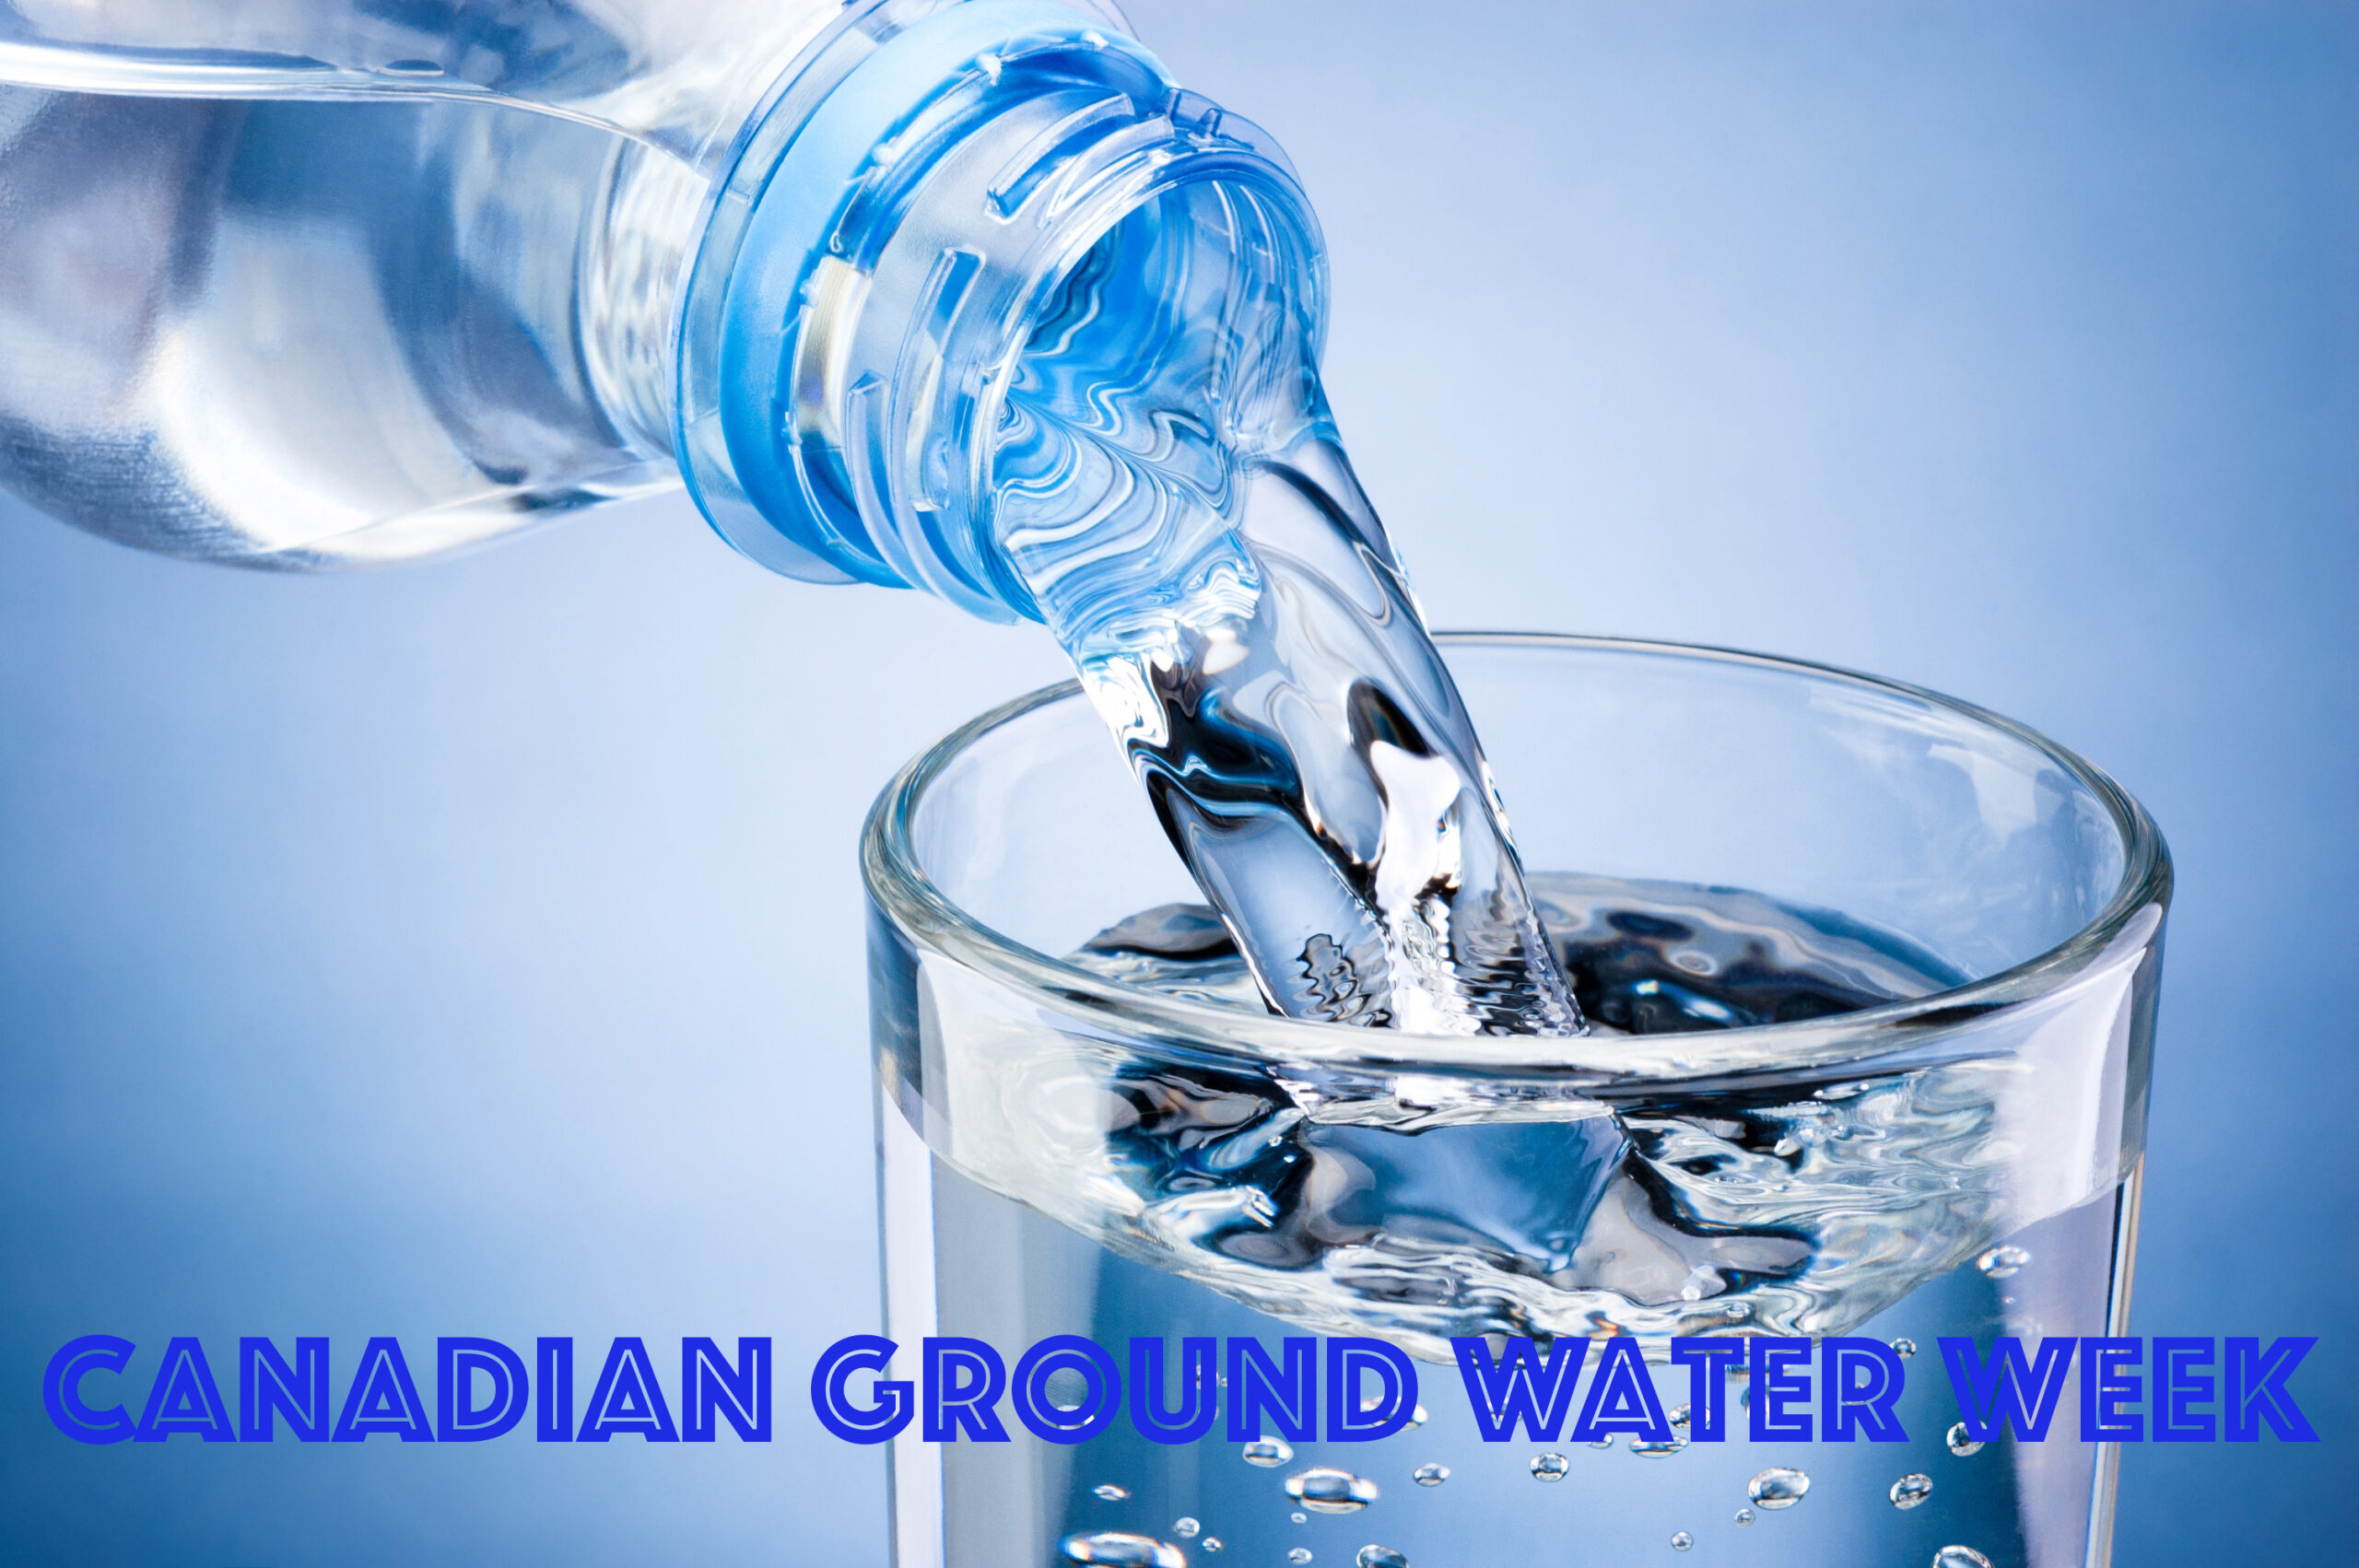 Canadian Groundwater Week